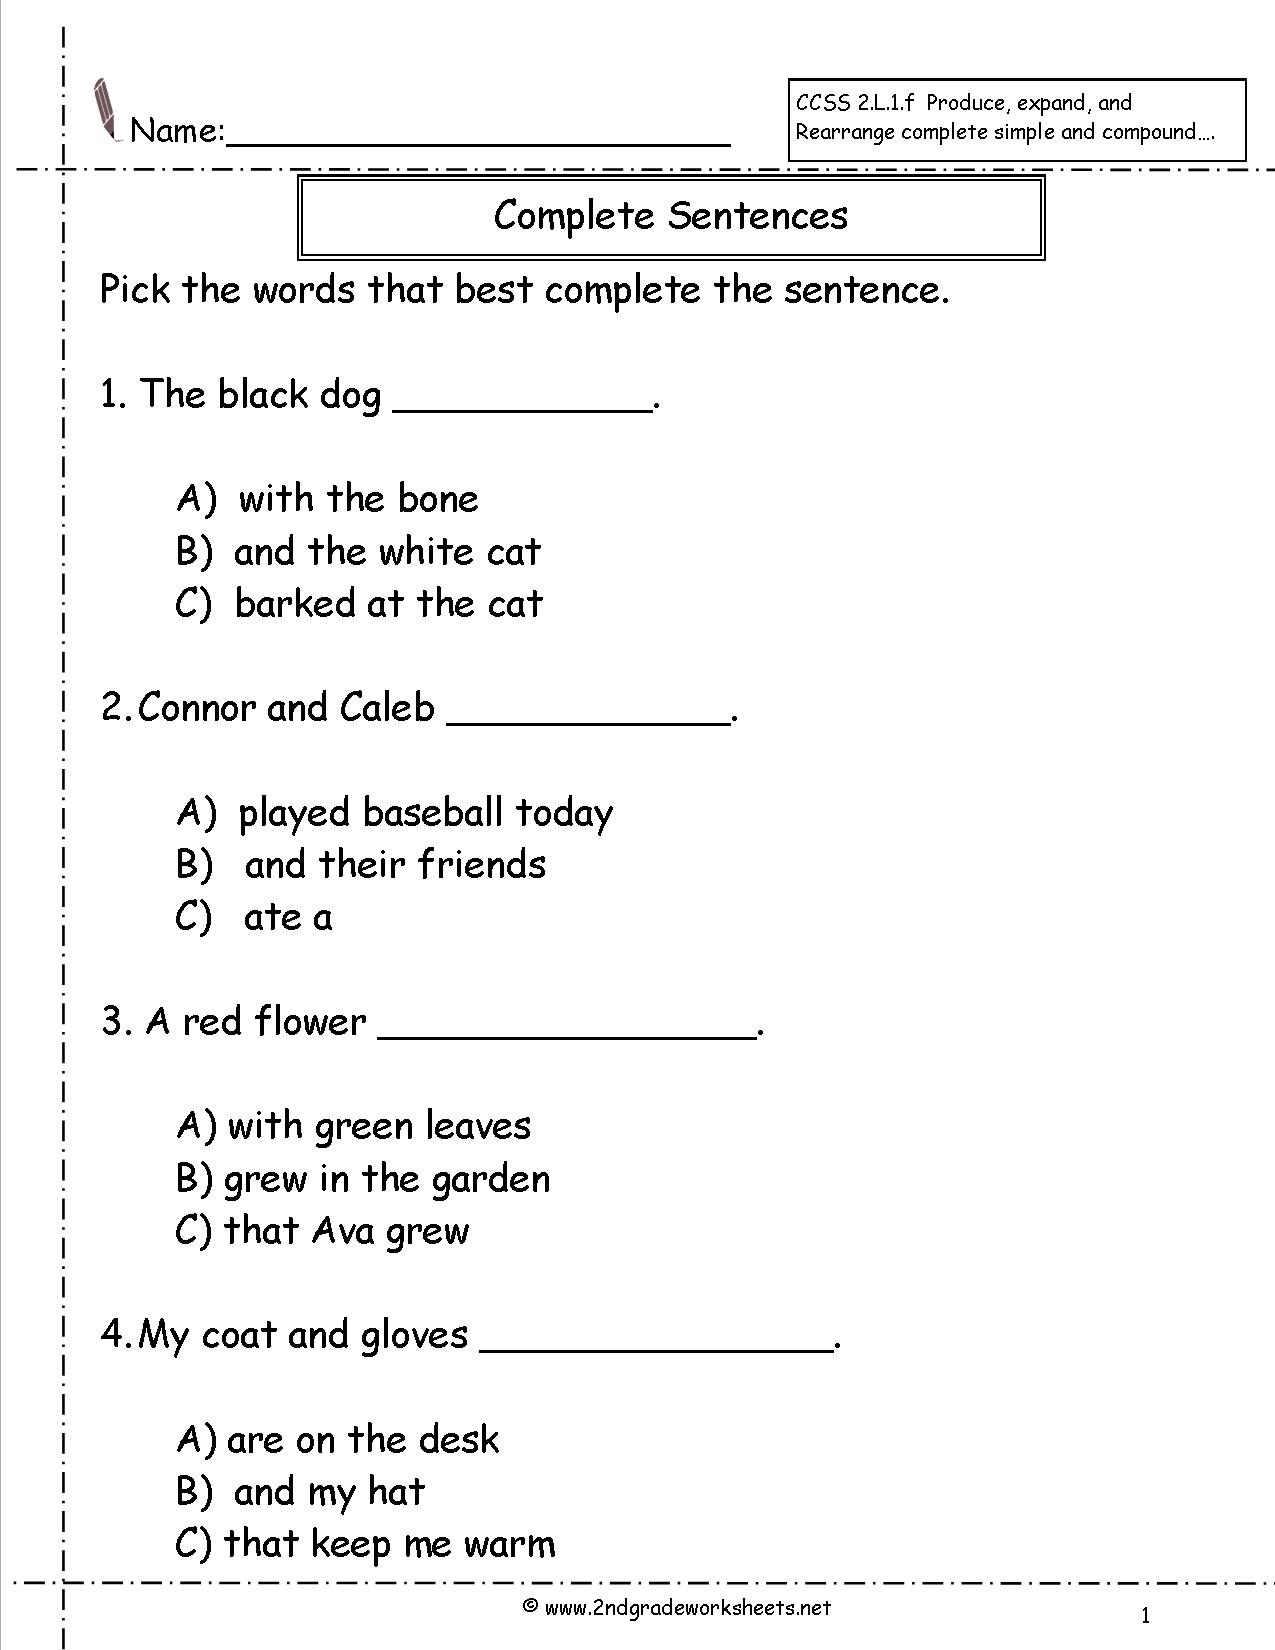 asking-questions-worksheets-for-grade-1-best-worksheet-questions-worksheet-1-asking-questions